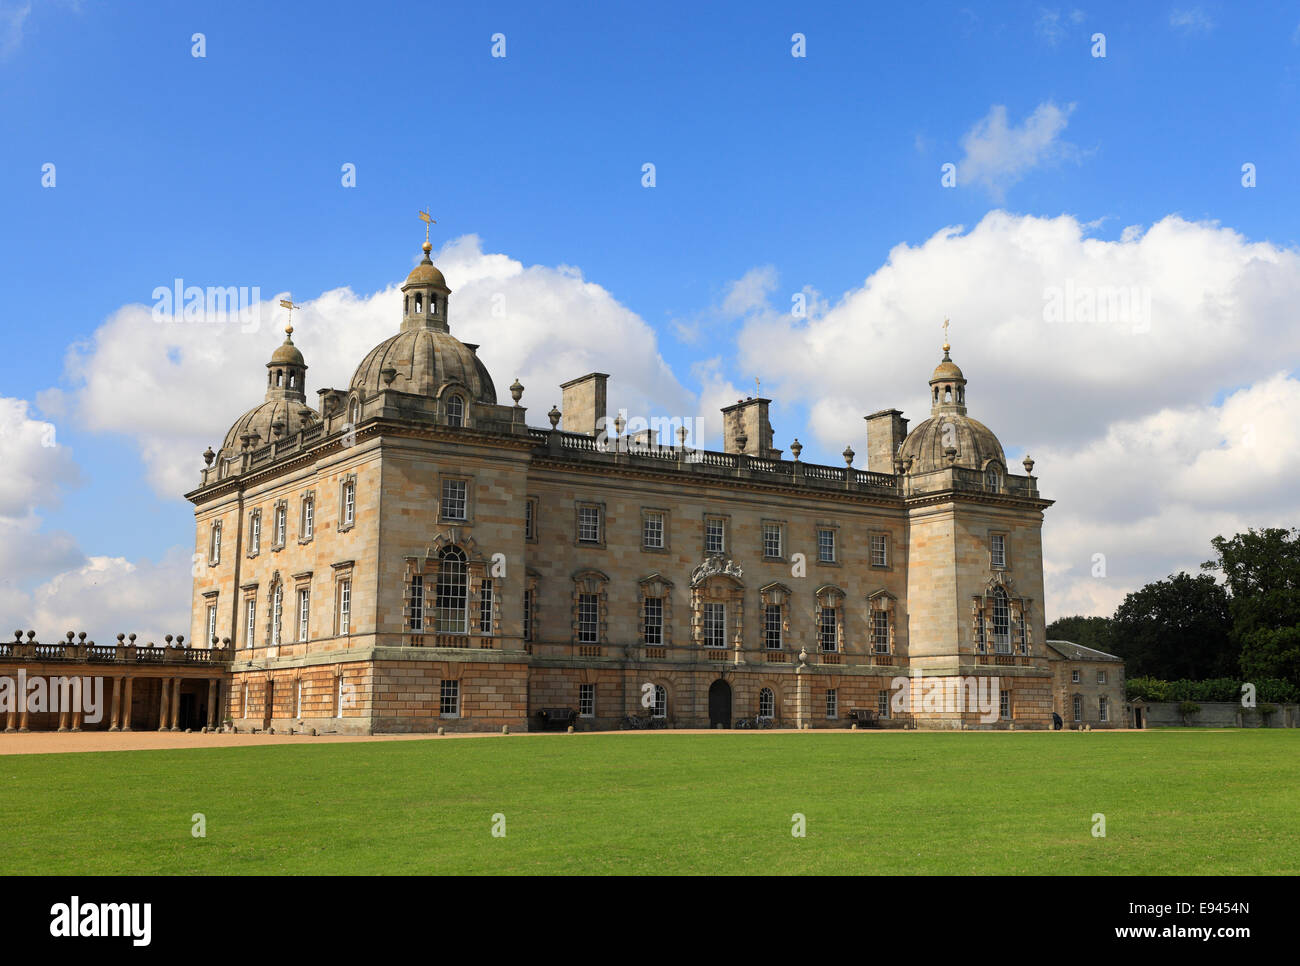 Houghton Hall, Norfolk, Angleterre. Banque D'Images